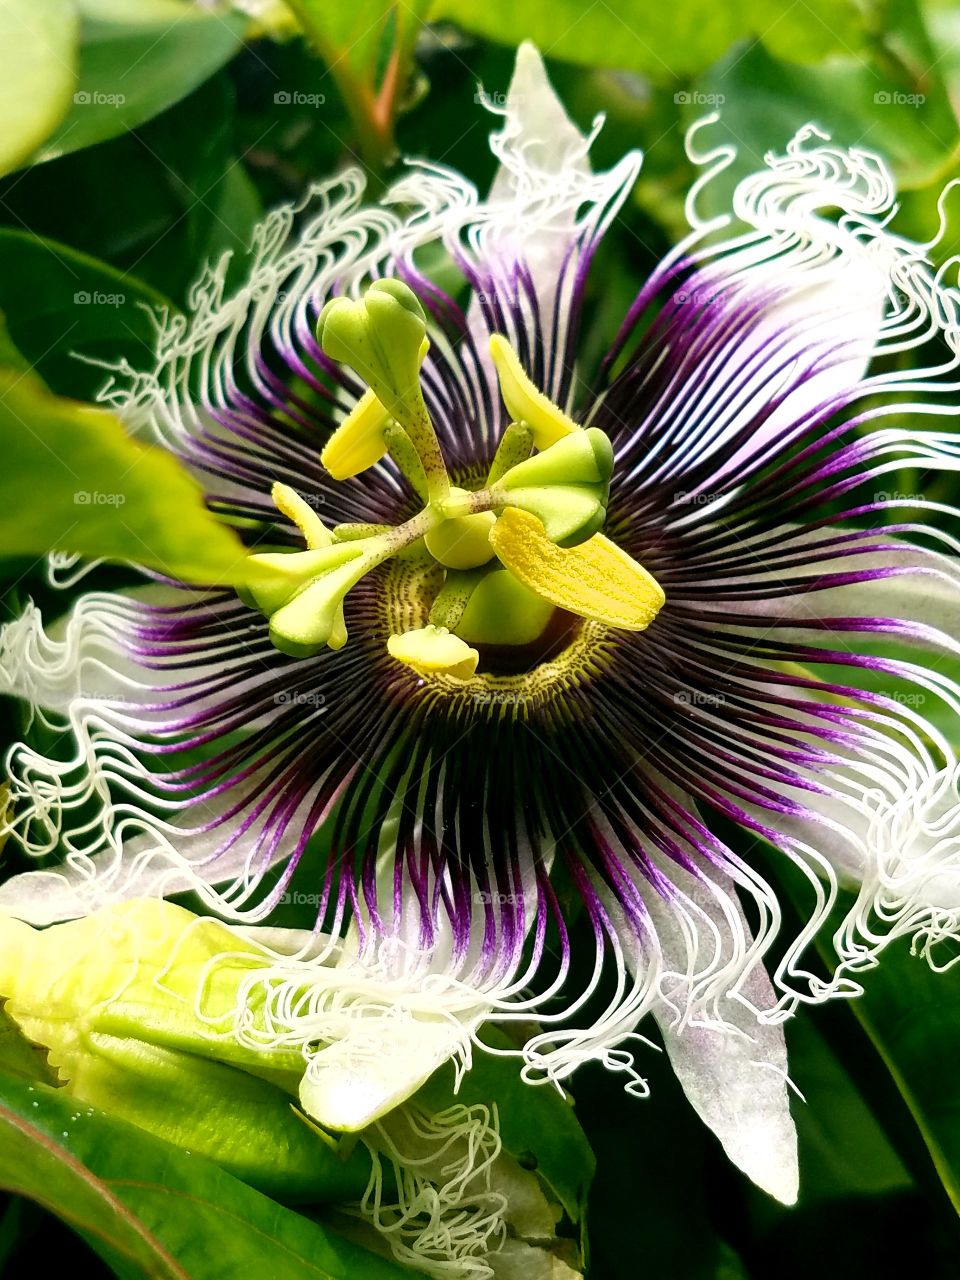 passionflower before it blooms into Lilikoi